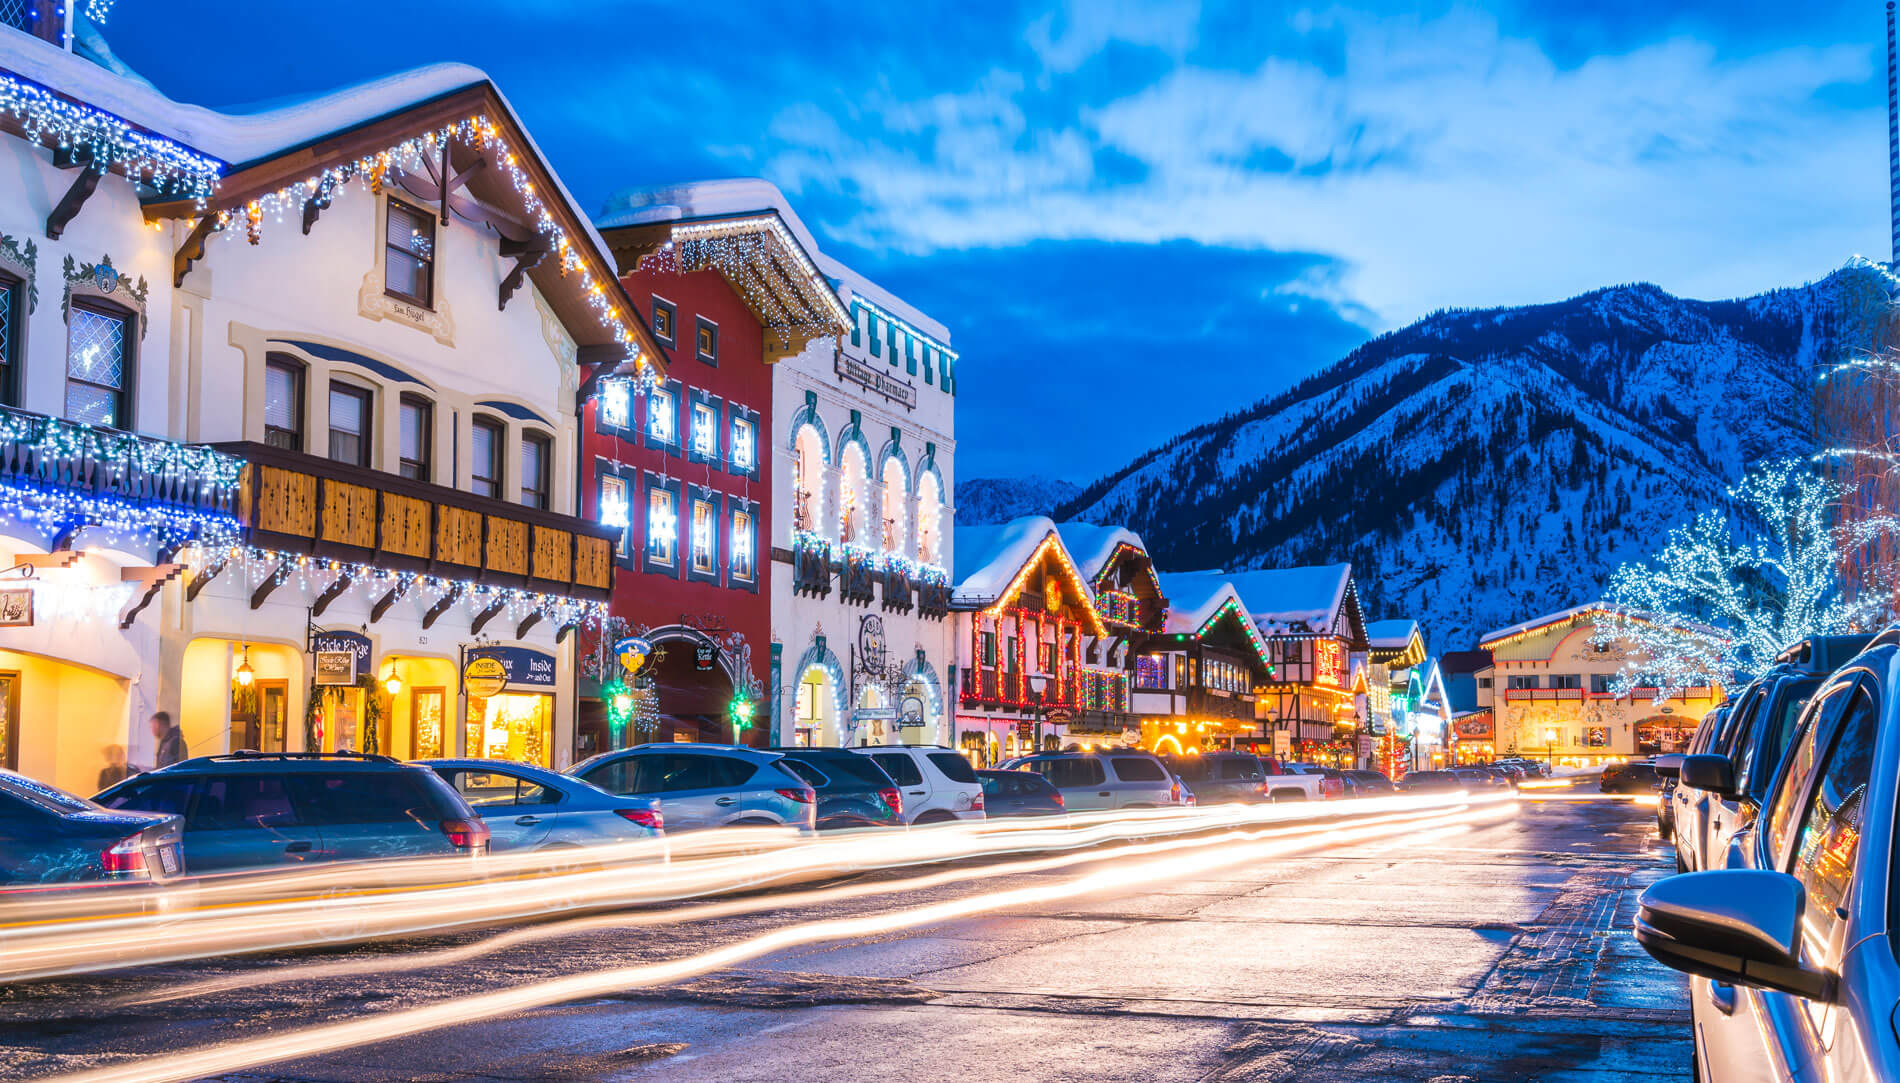 Overview of Leavenworth